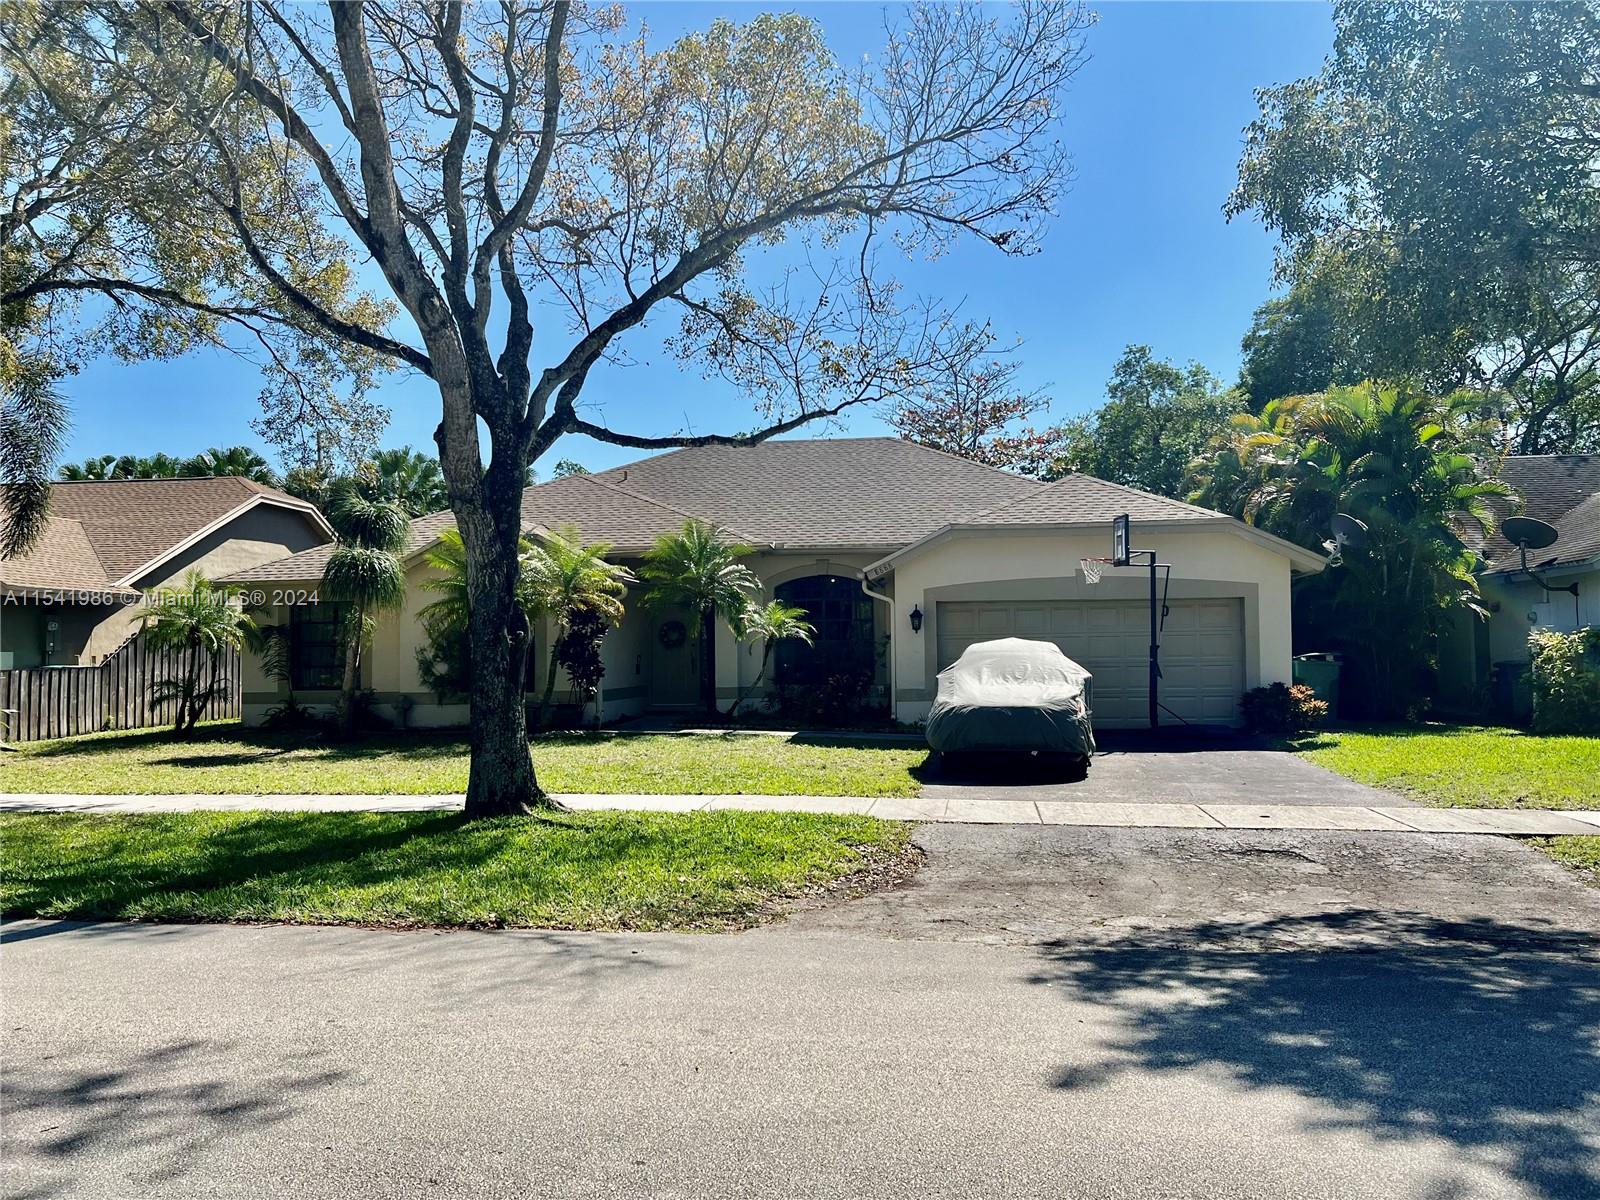 8888 SW 59th St, Cooper City, Florida 33328, 4 Bedrooms Bedrooms, ,2 BathroomsBathrooms,Residentiallease,For Rent,8888 SW 59th St,A11541986